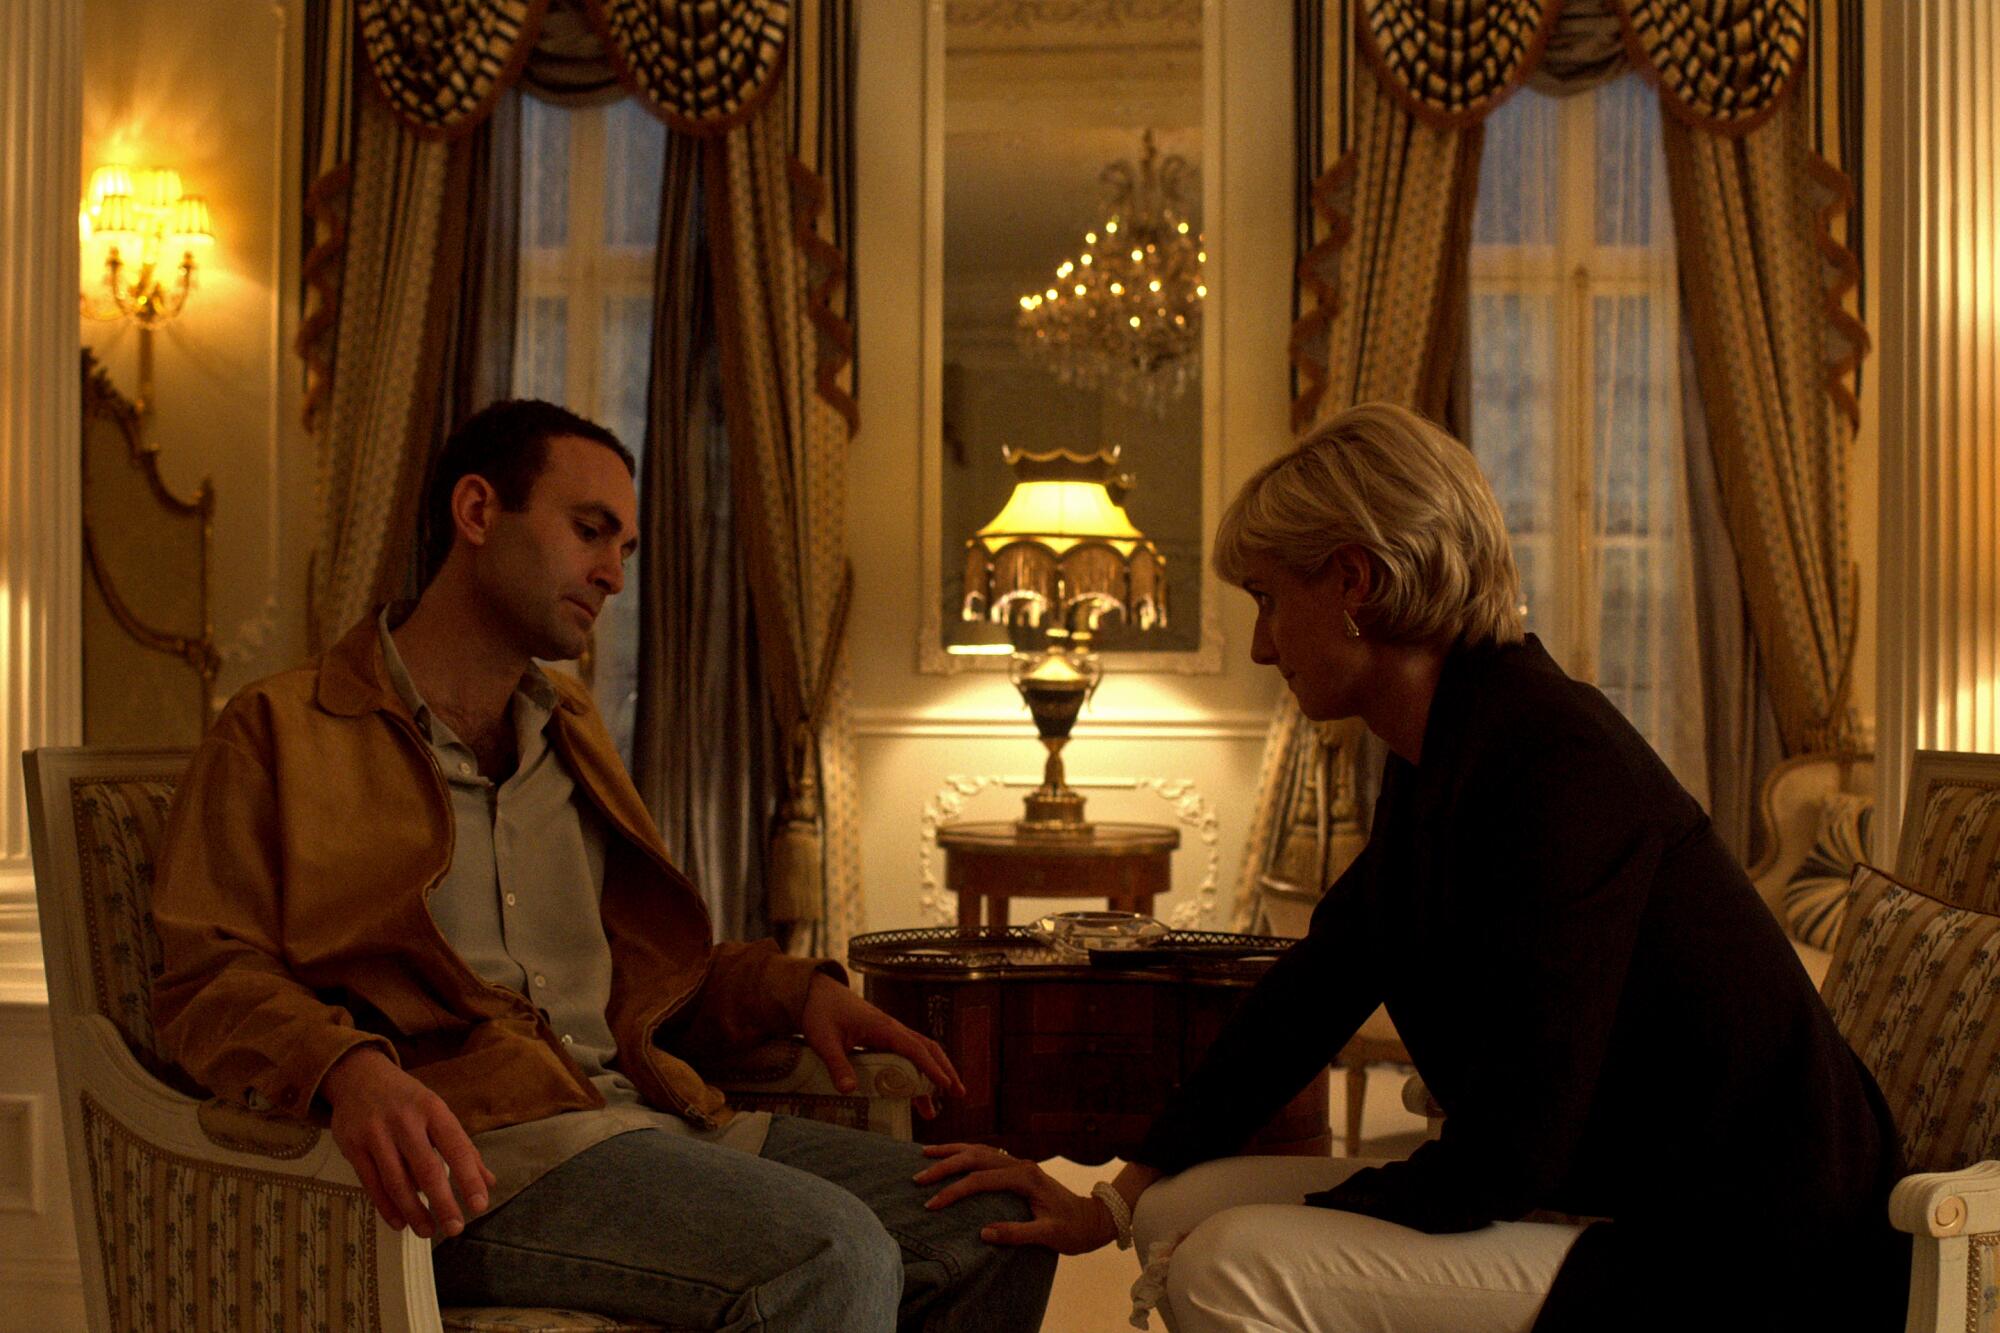 Khalid Abdalla as Dodi, left, and Elizabeth Debicki as Princess Diana, sit in chairs across from each other in a lit room.